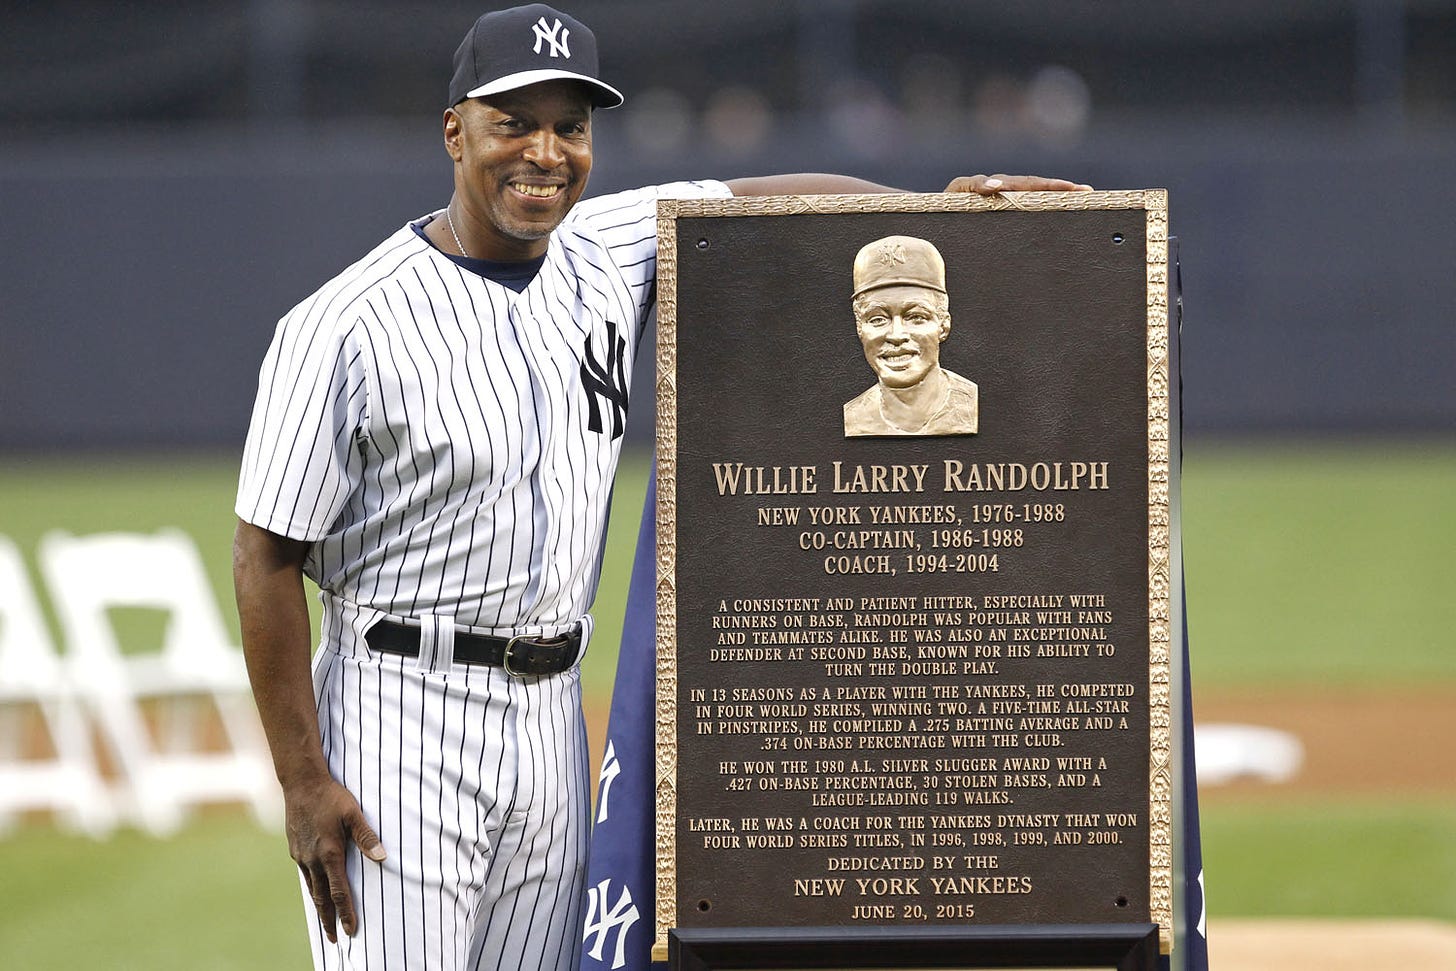 Stottlemyre shocked by plaque as Willie Randolph swipes at Mets